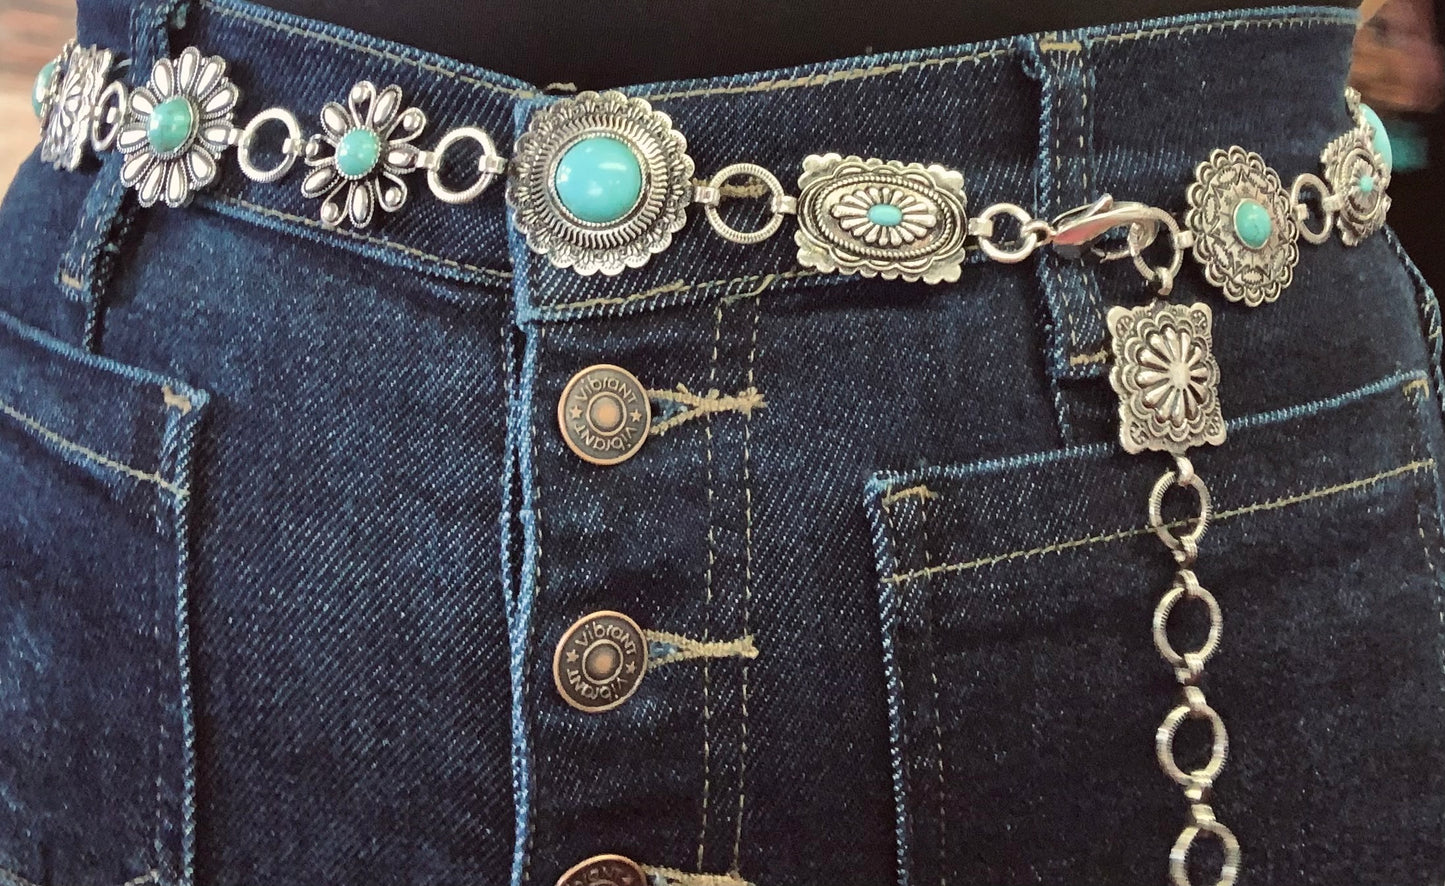 “Sterling Cowgirl” Concho Belt